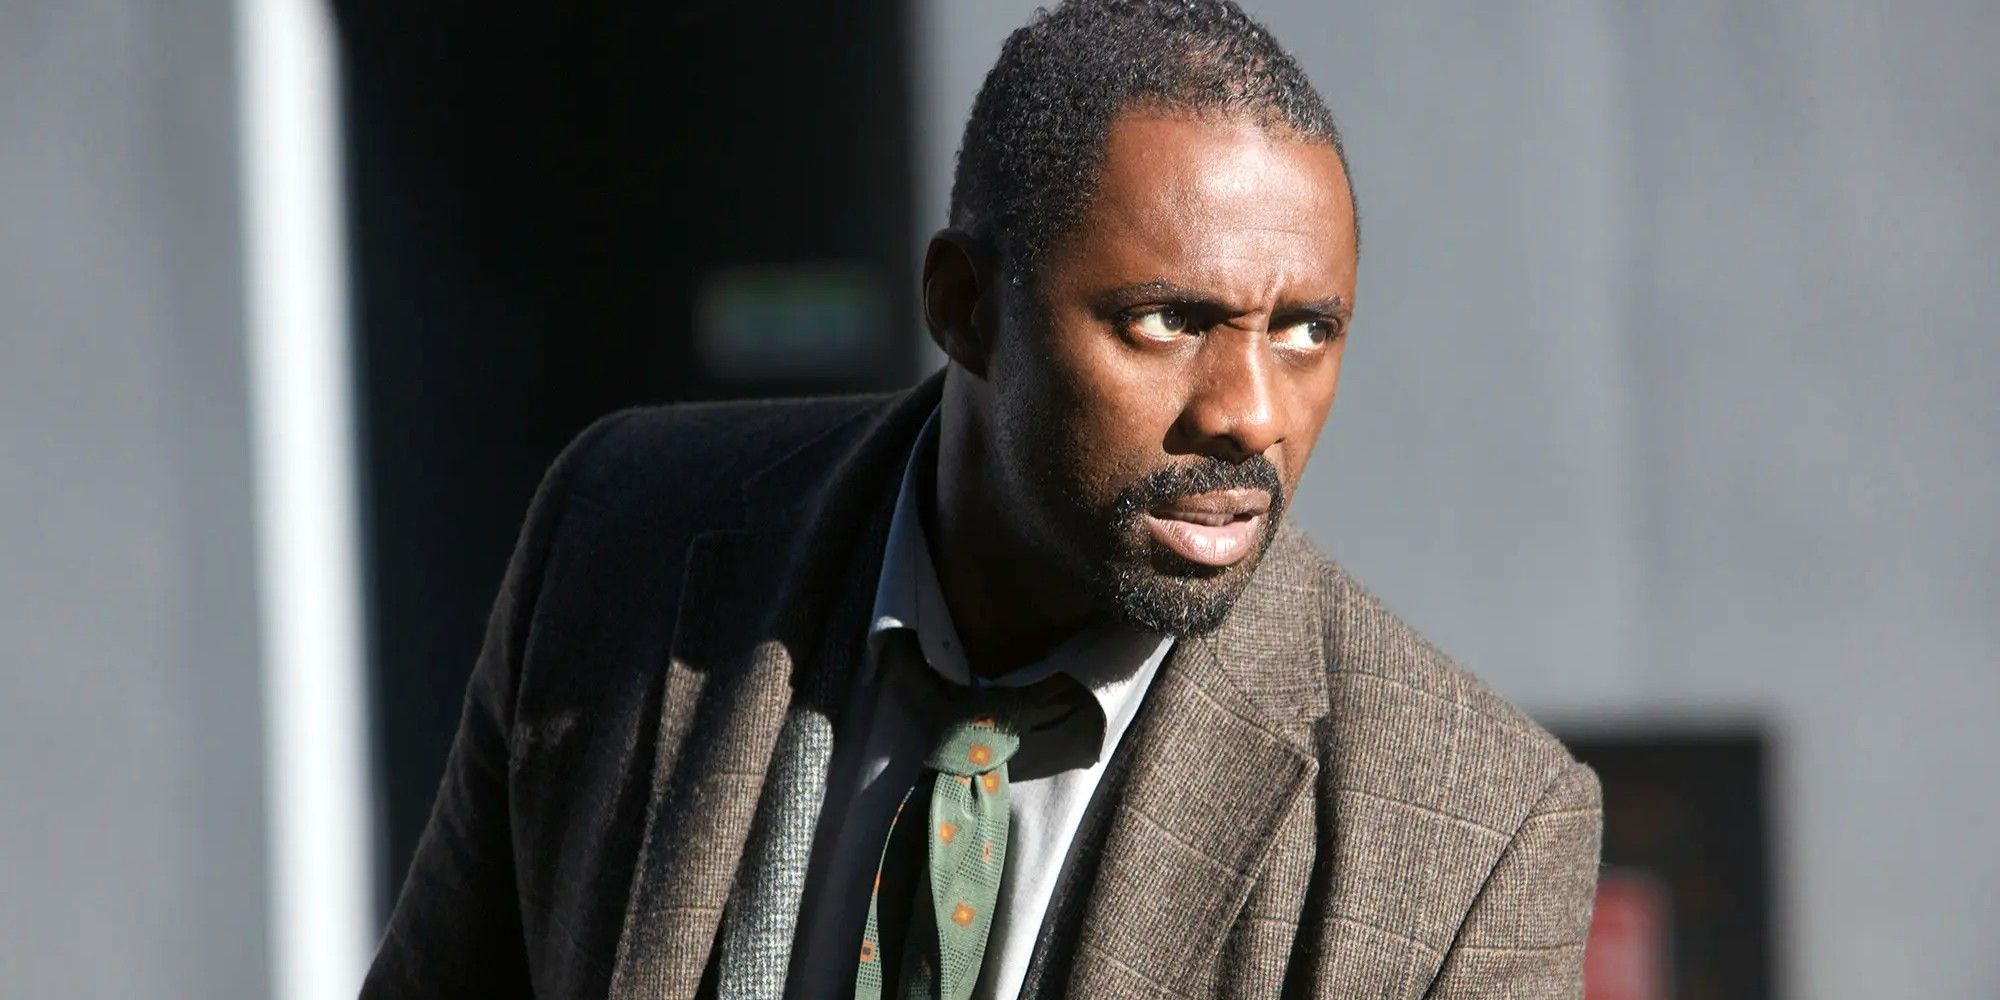 Idris Elba as Luther looking to his side concerned.